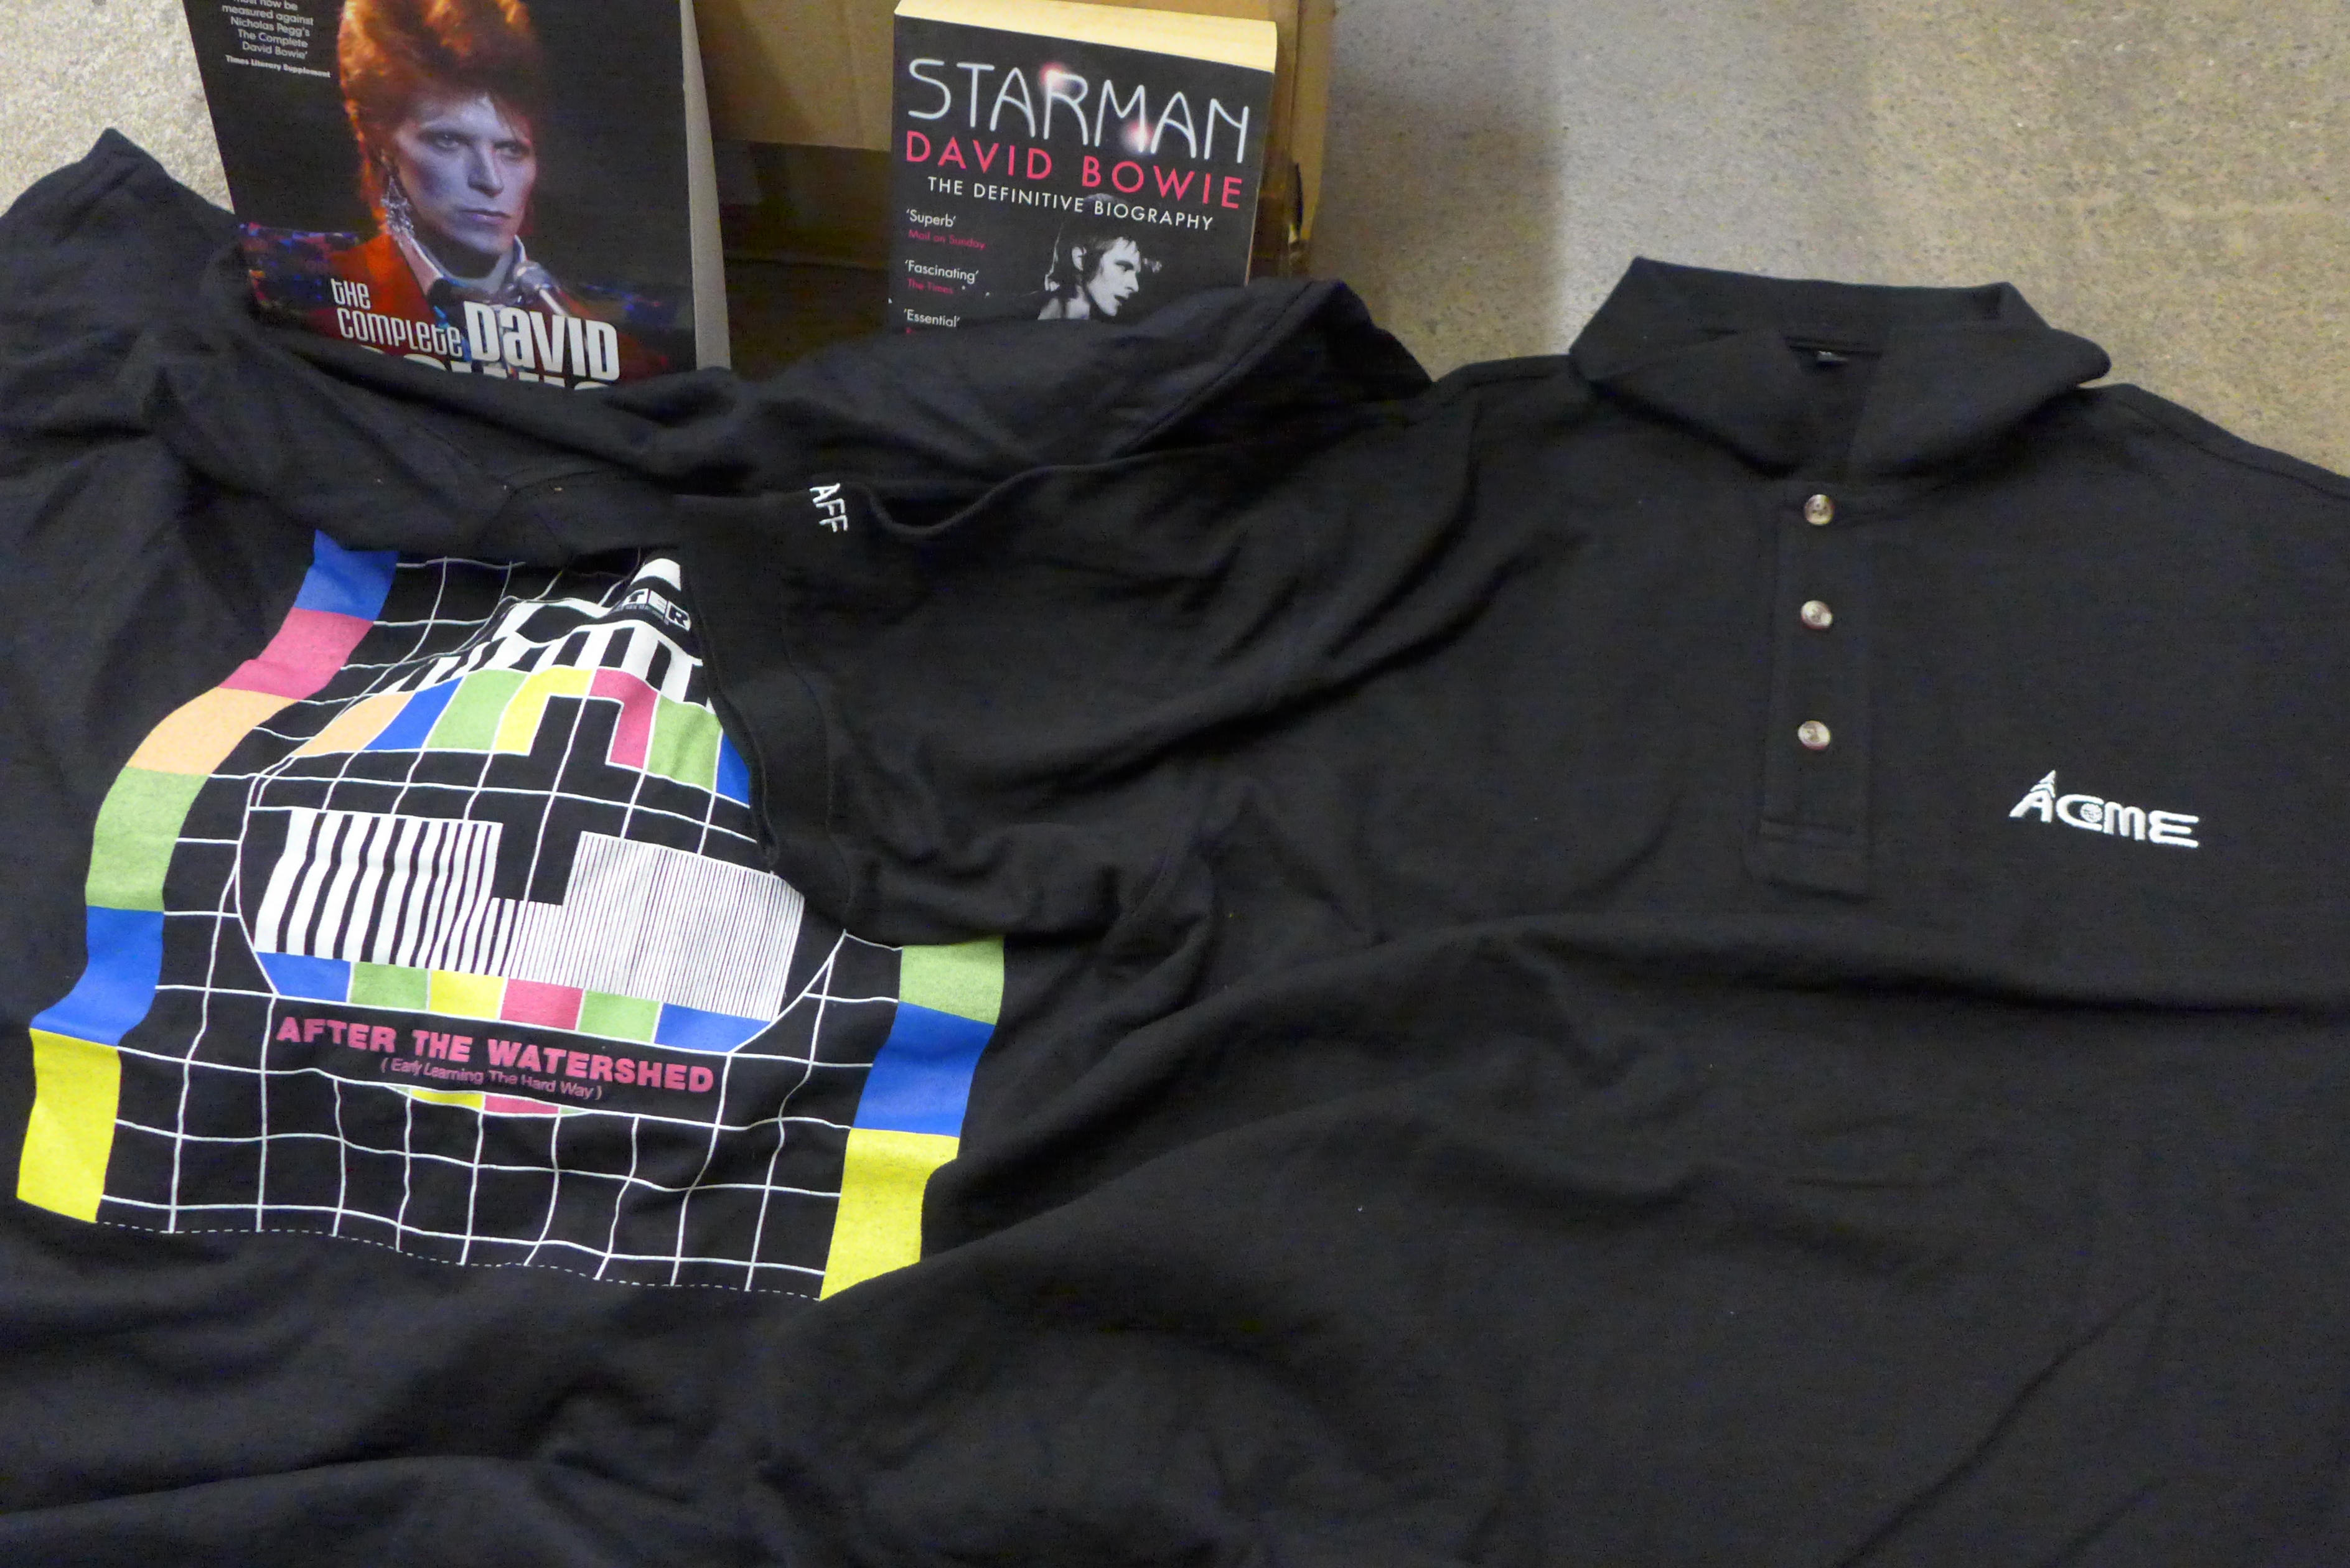 Music related T-shirts, rock music books and two David Bowie books - Image 2 of 5